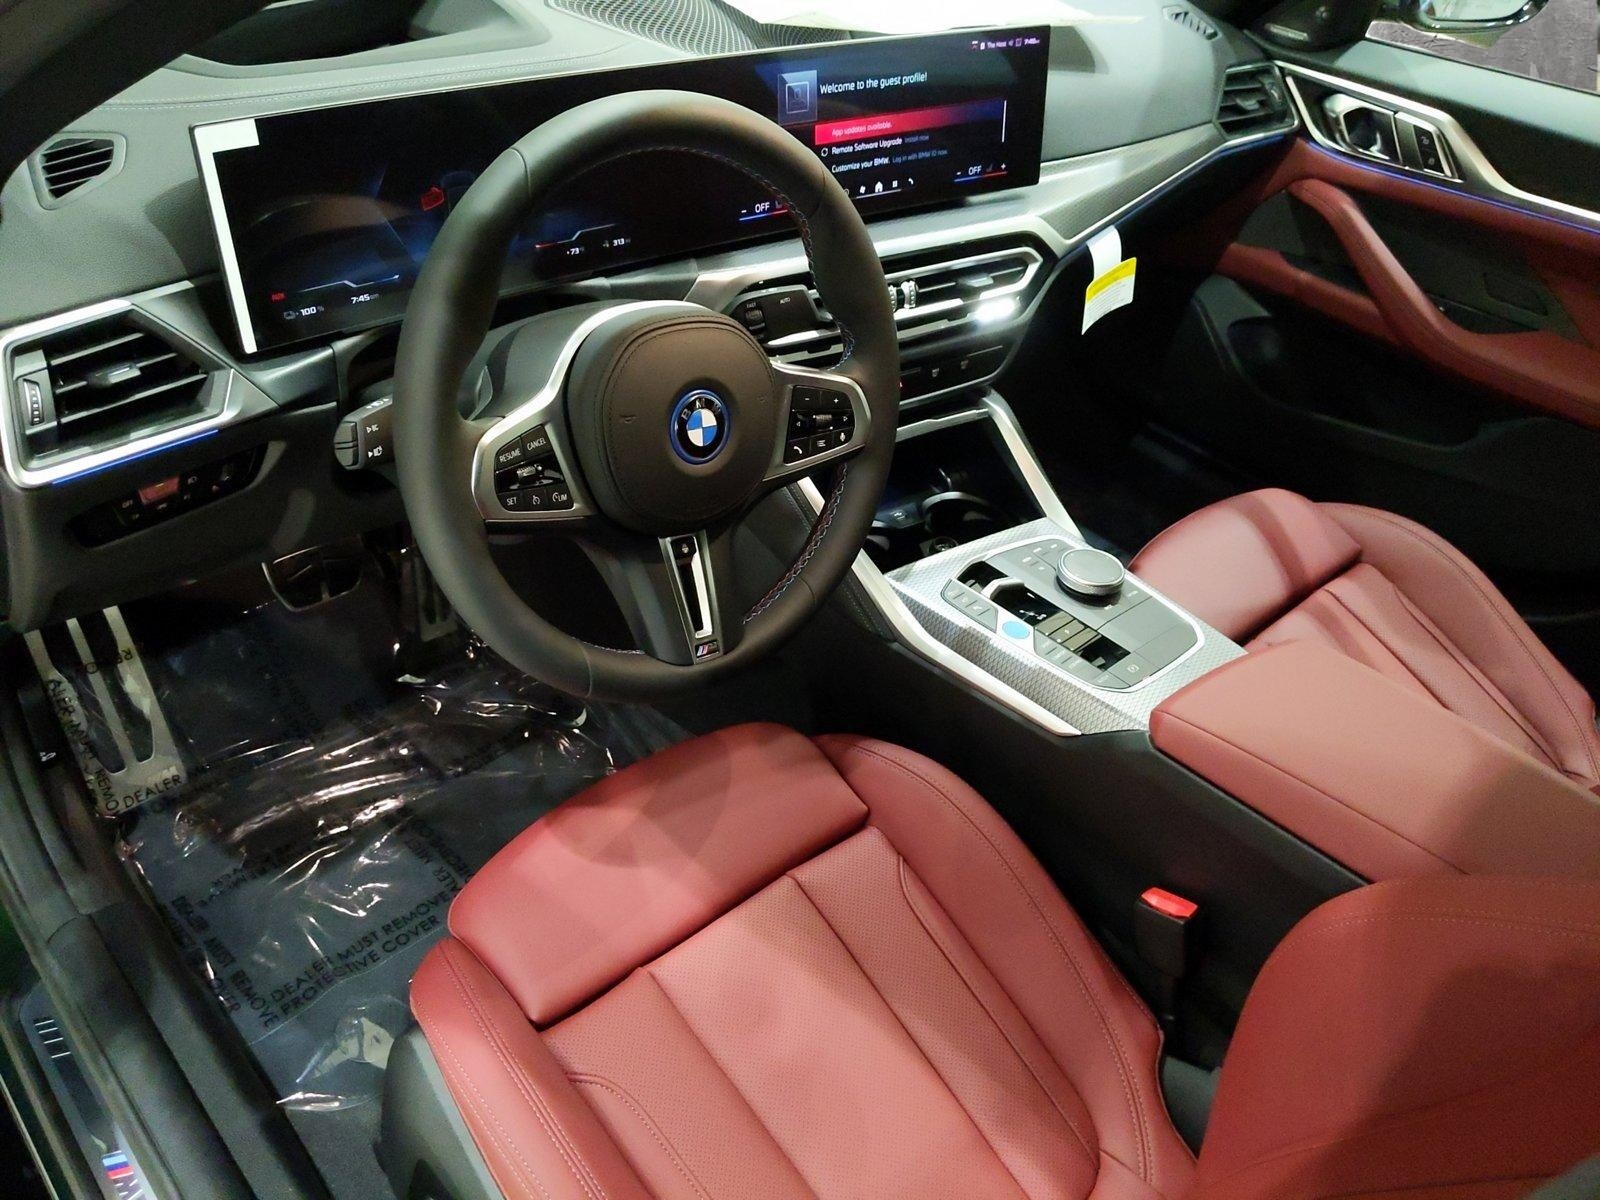 BMW dealership interiors will be upgraded